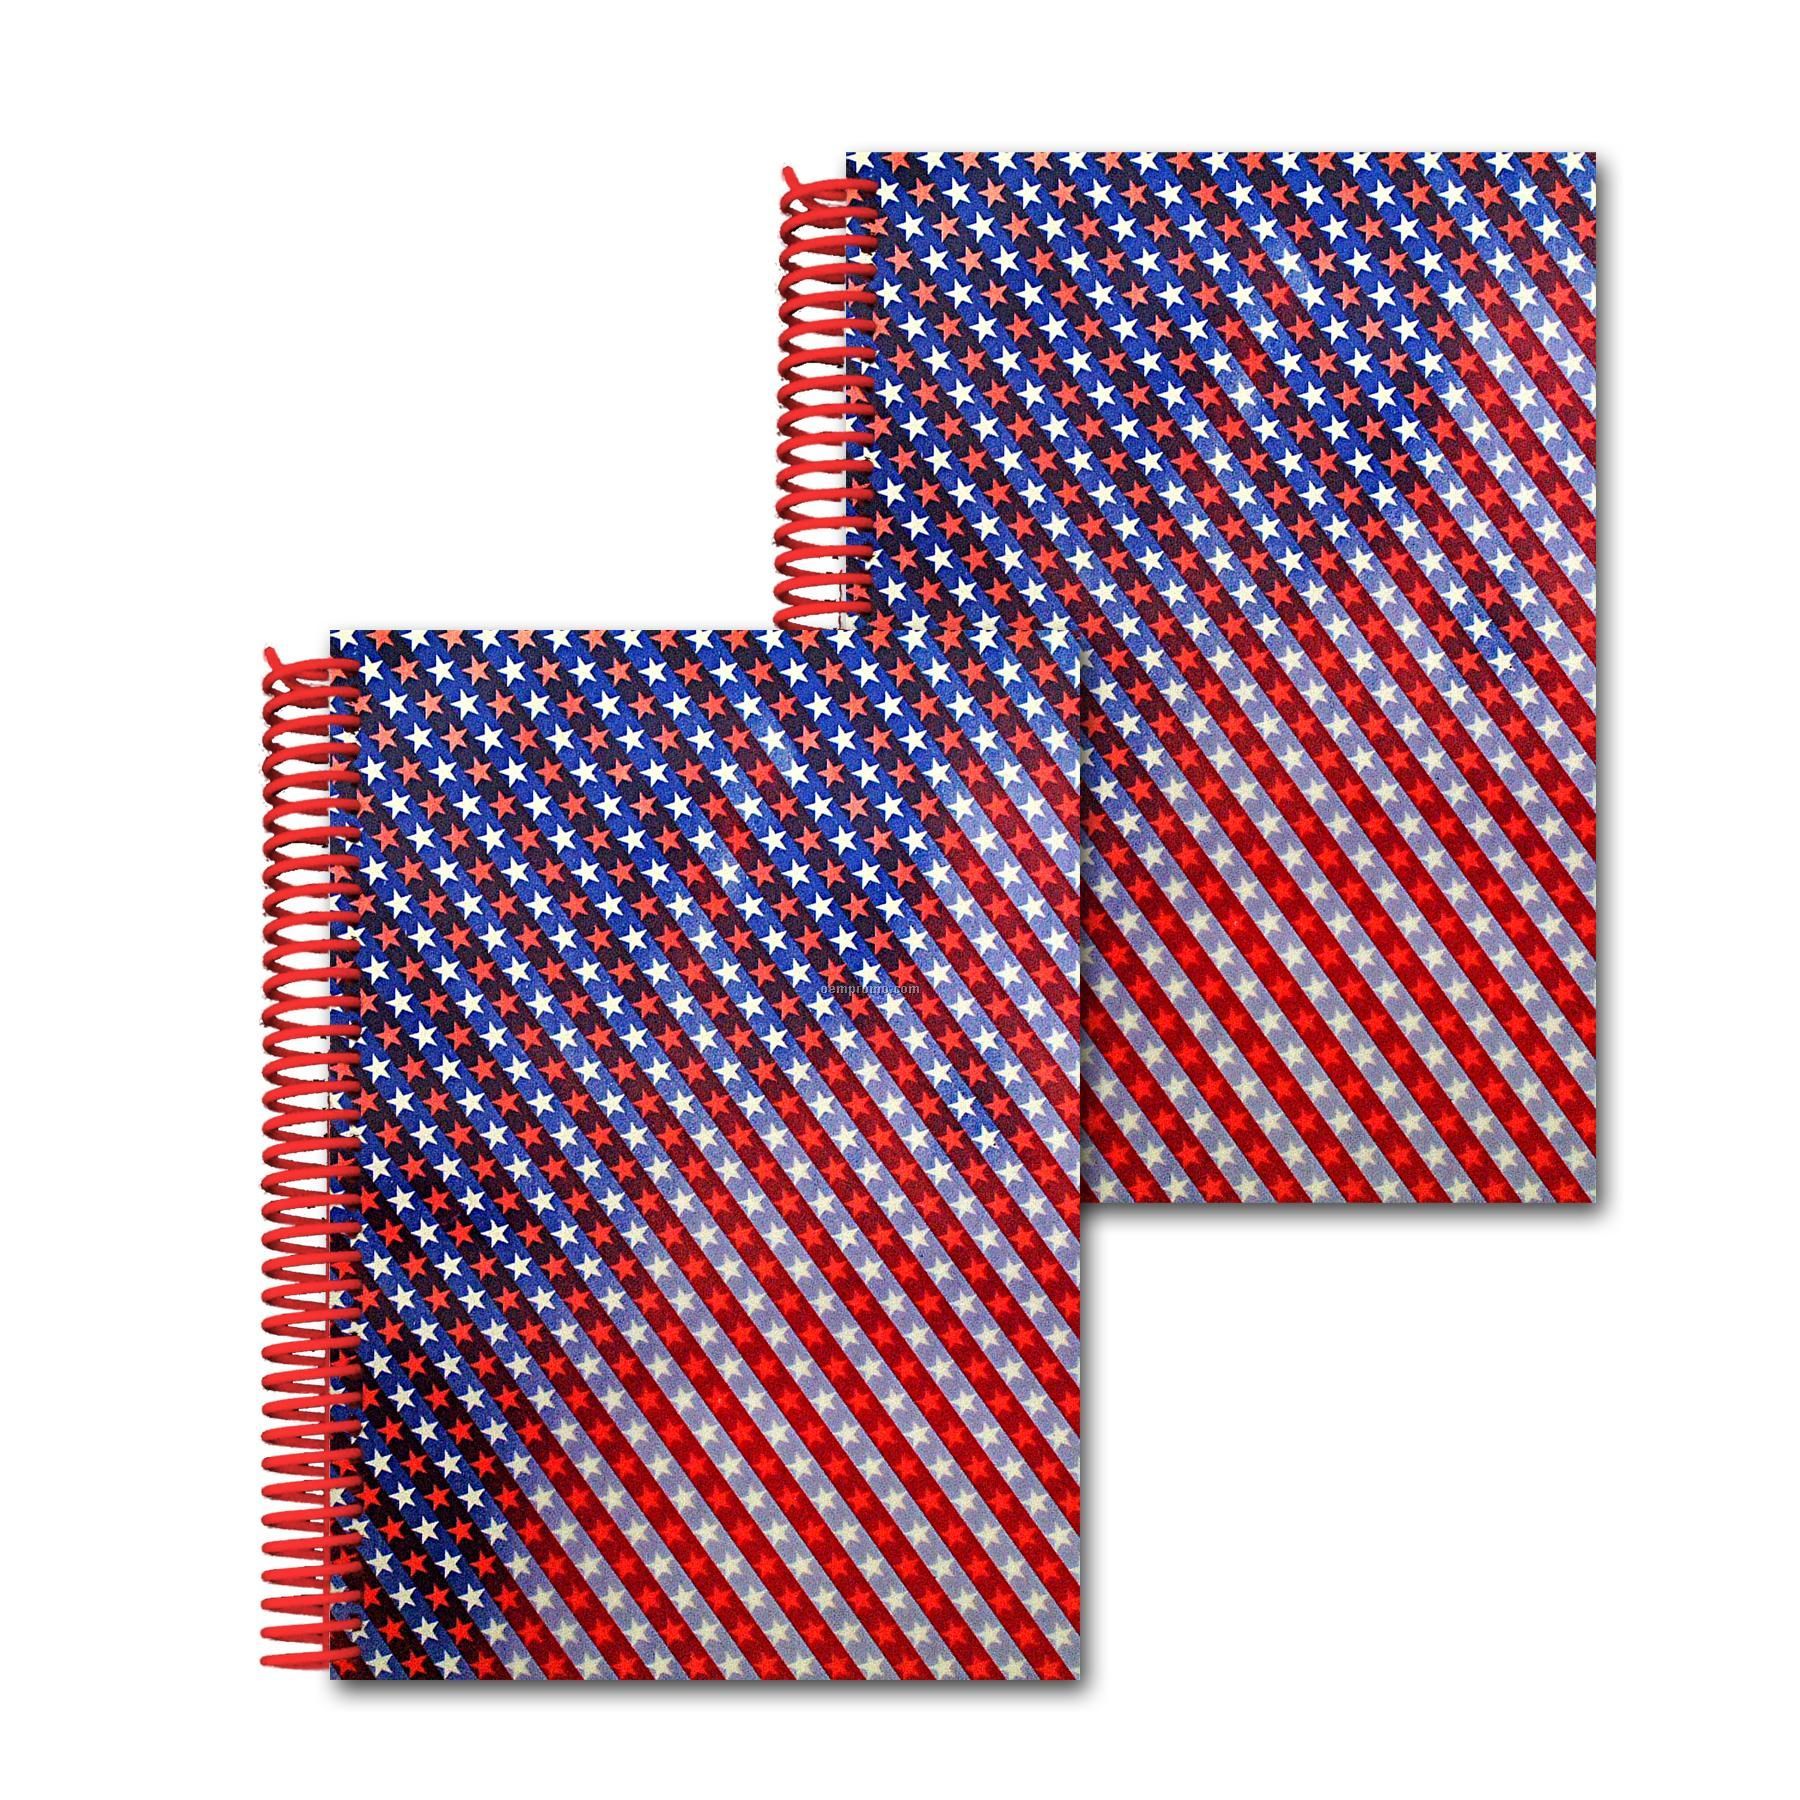 3d Lenticular Notebook - Stock/Animated Stars And Stripes (Blanks)